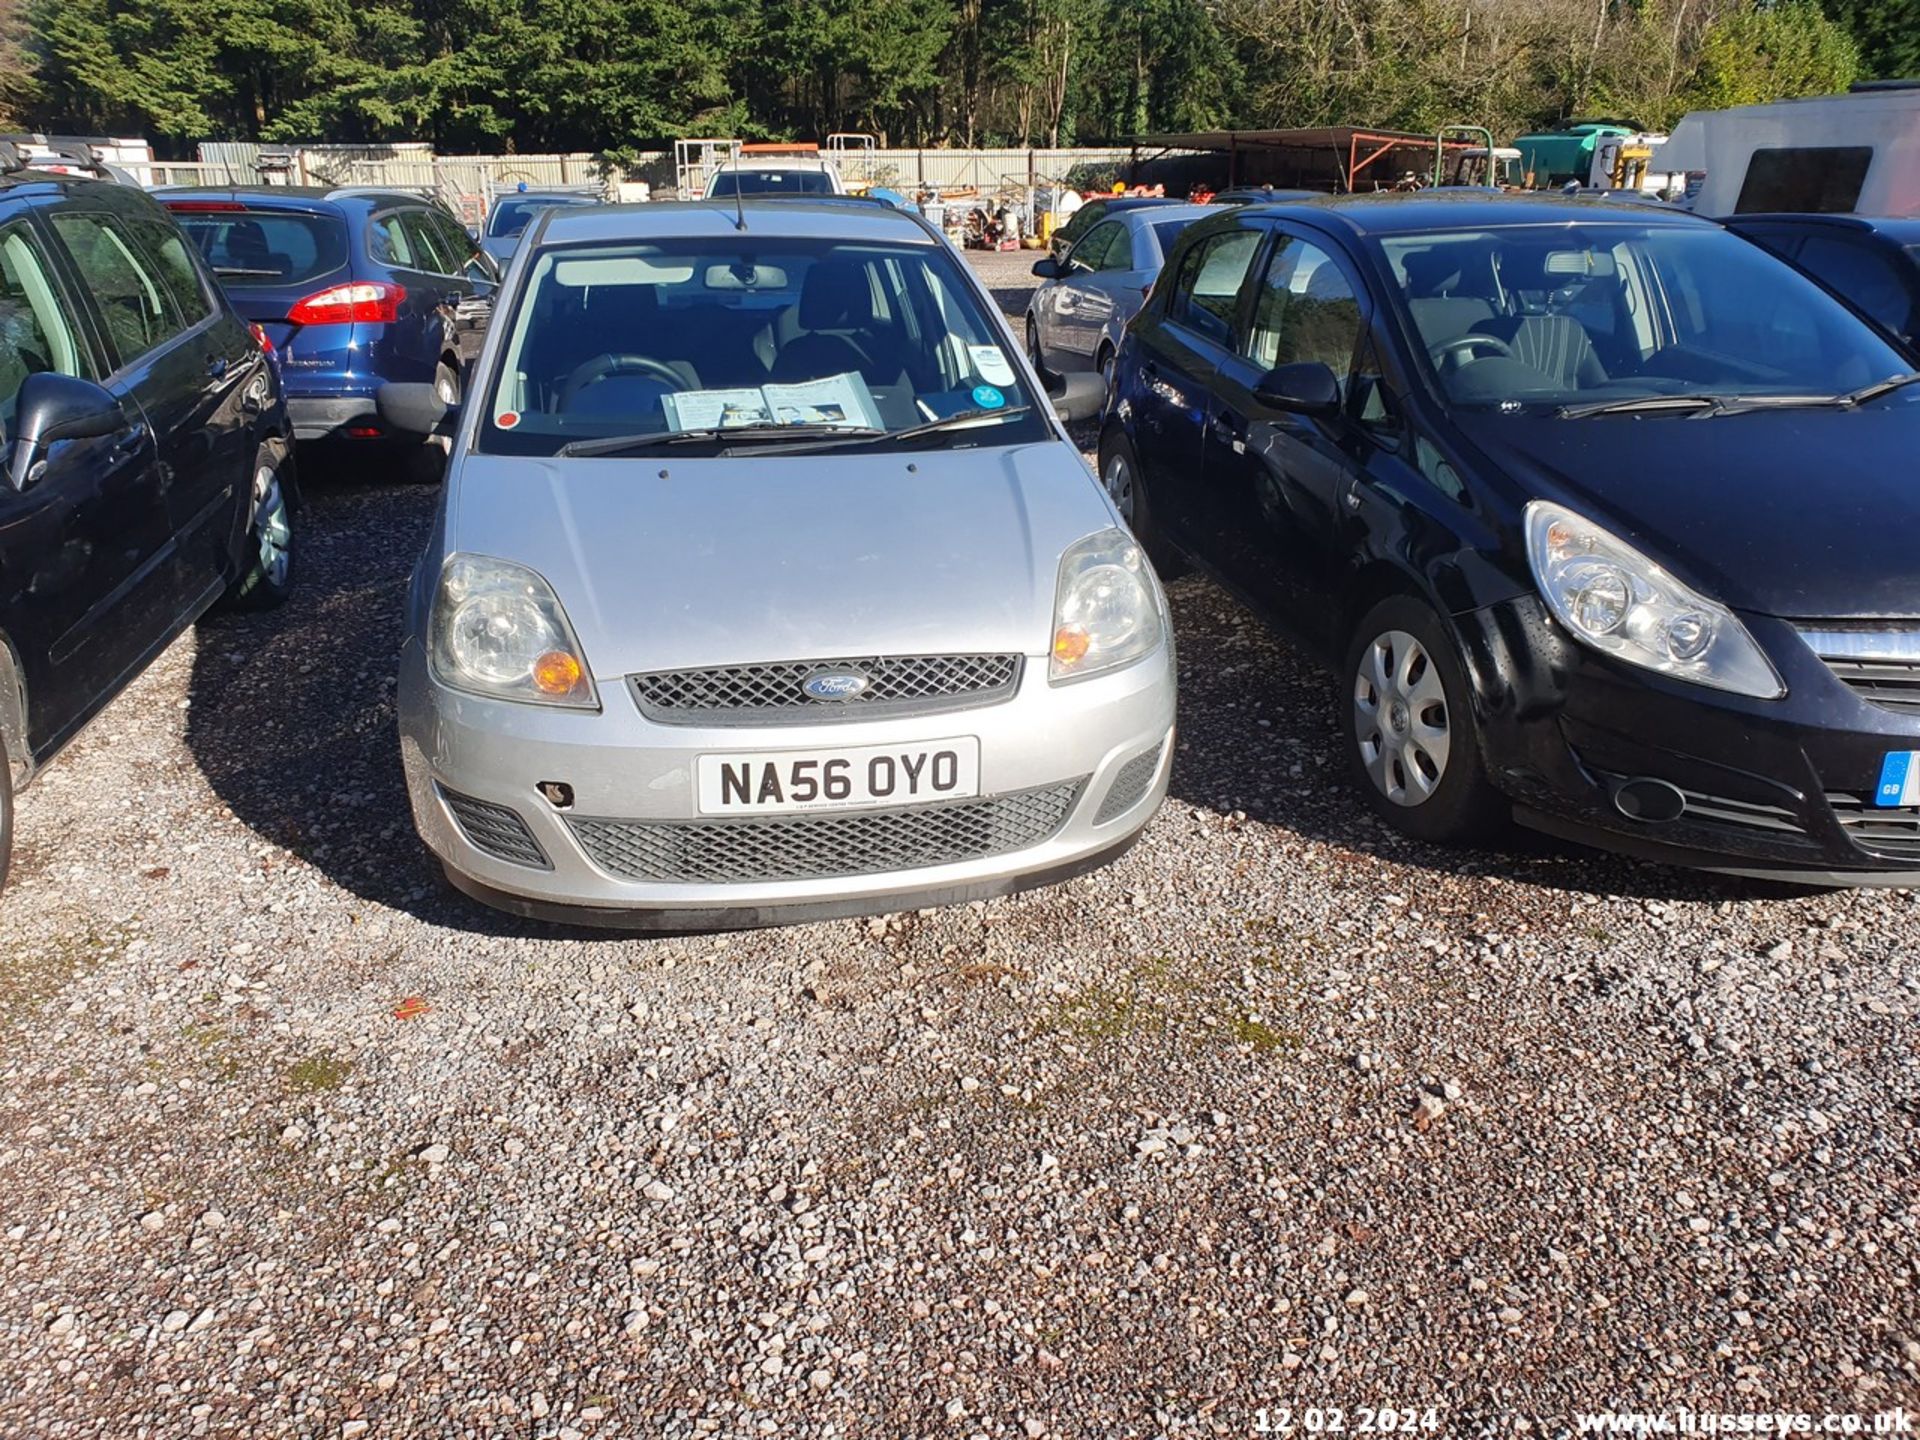 06/56 FORD FIESTA STYLE TDCI - 1399cc 5dr Hatchback (Silver) - Image 24 of 39